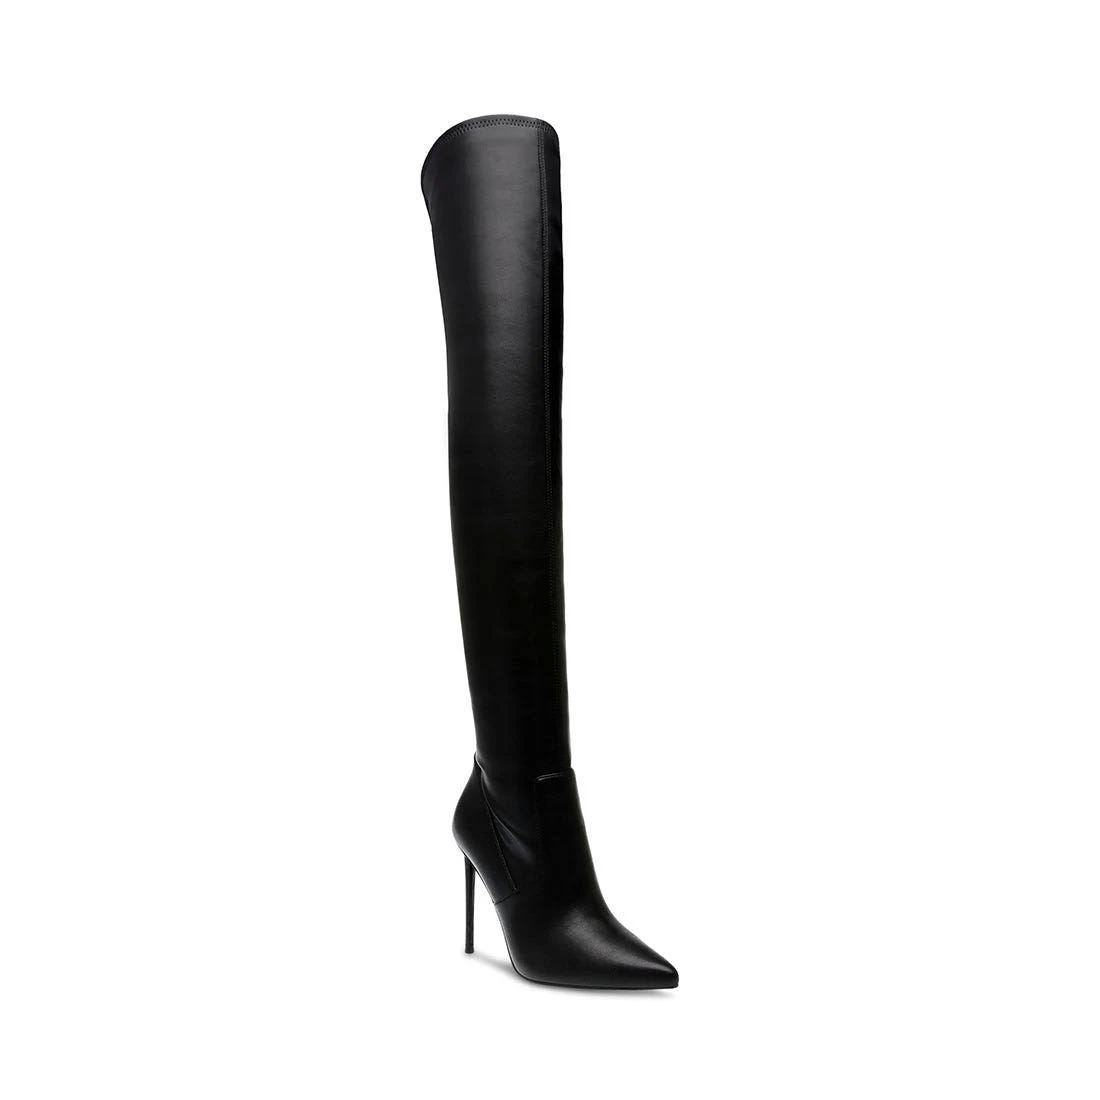 Leather Thigh-High Stiletto Boots with Synthetic Sole | Image